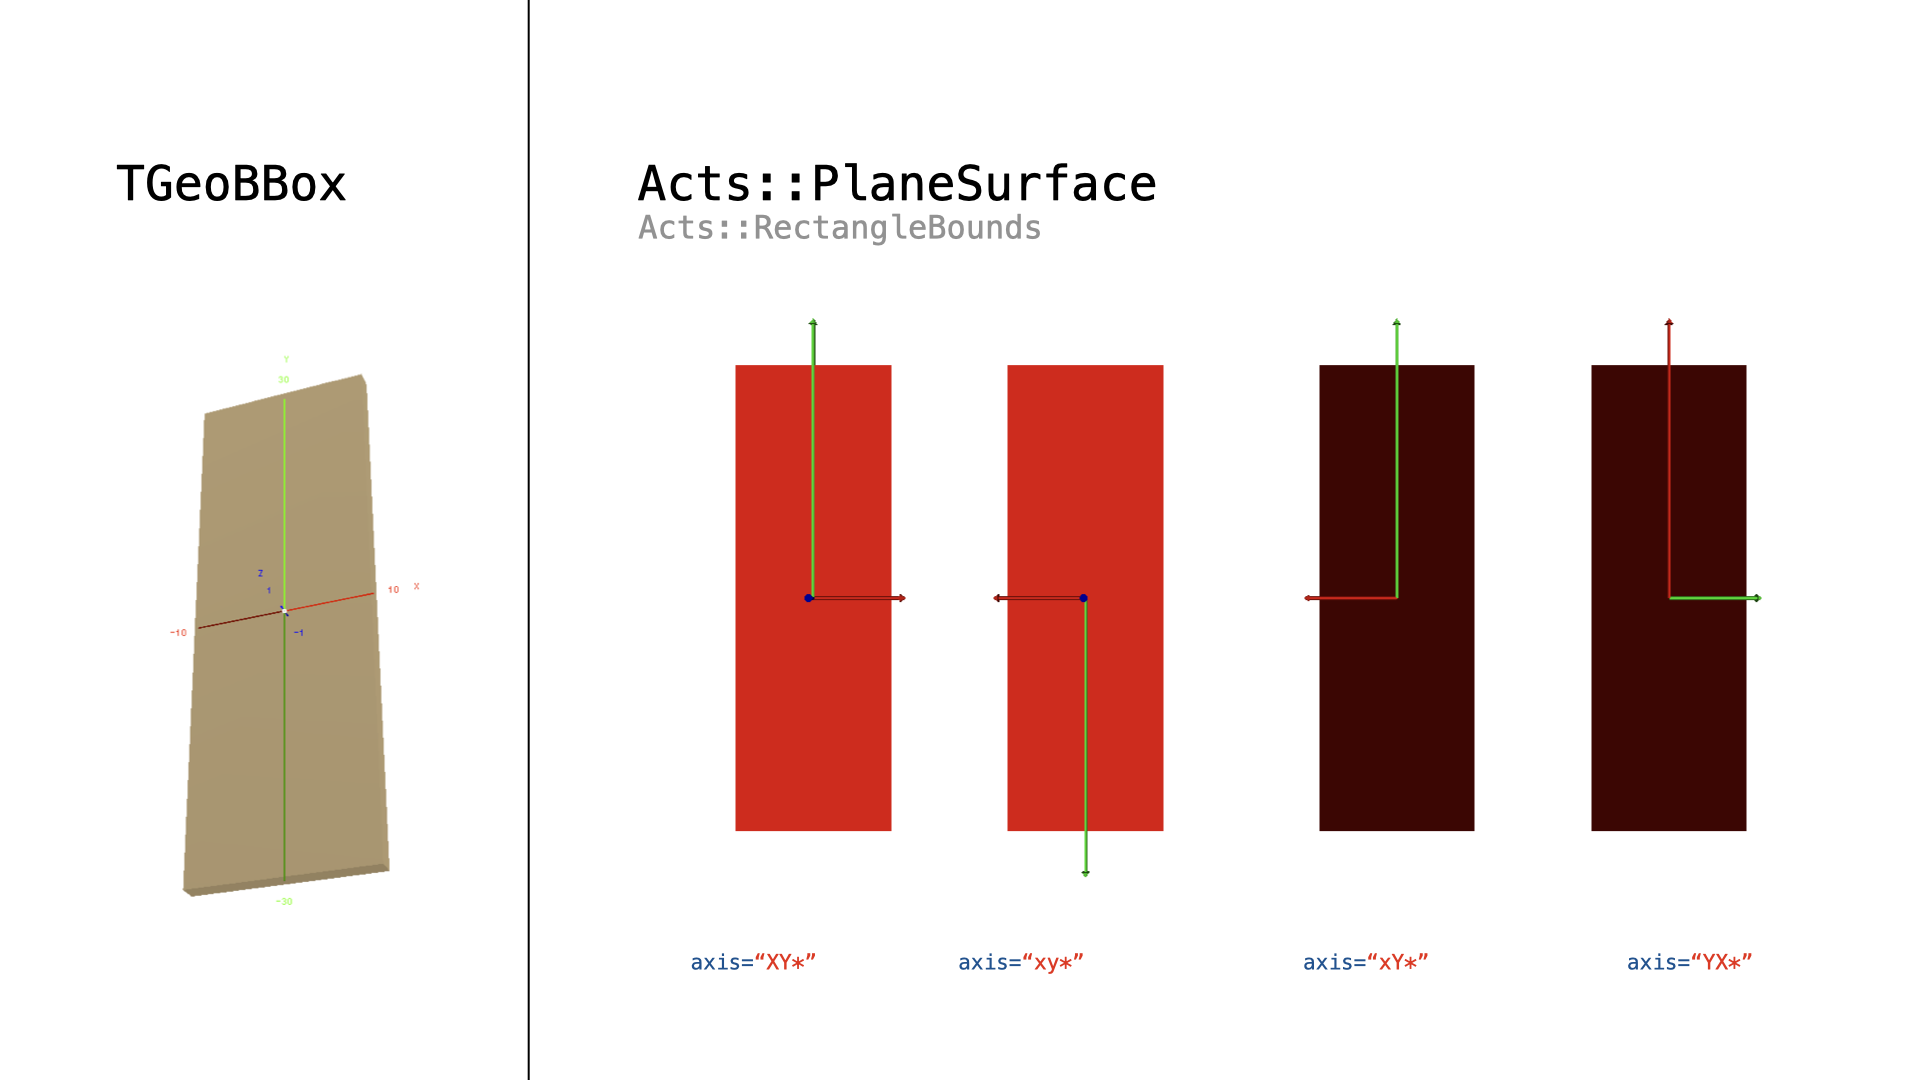 Conversion of a ``TGeoBBox`` shape into a ``Acts::PlaneSurface`` with ``Acts::RectangleBounds``. All axes iterations are allowed for this conversion.